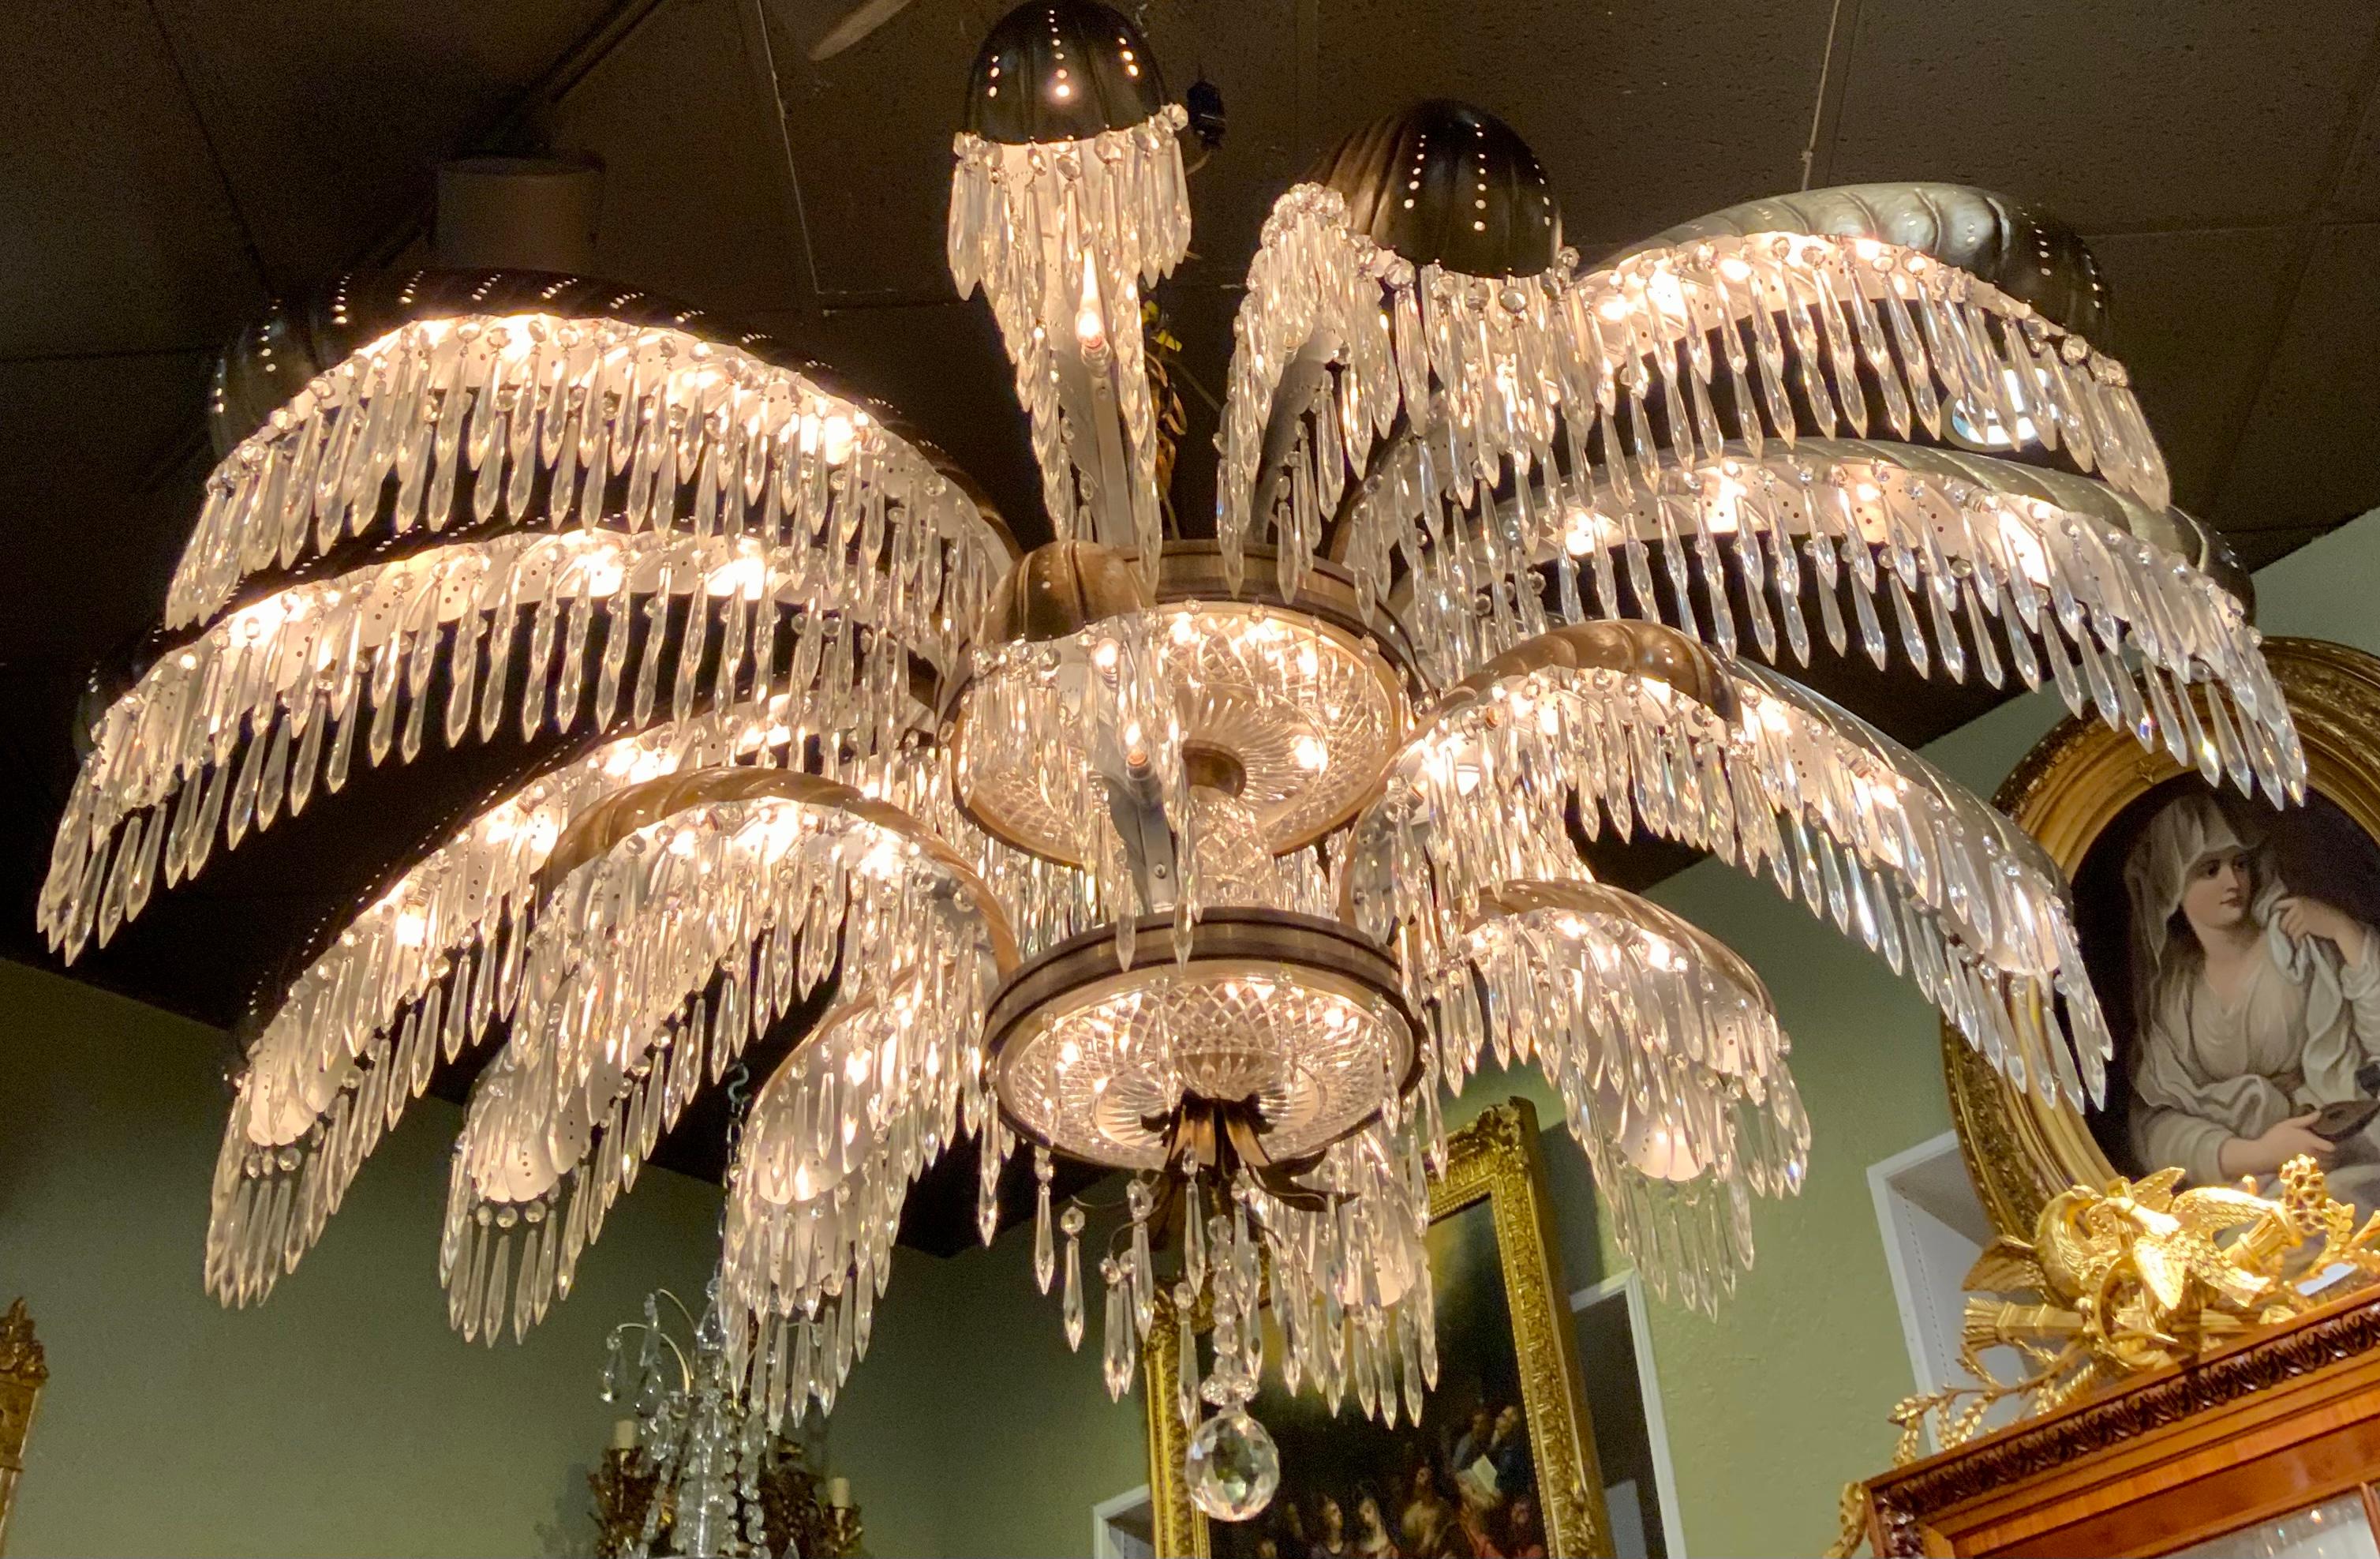 This chandelier was custom made for The Houston Club ball room and hung
There until the building was demolished. It was rescued and has
Been restored with new wiring. It has exceptional style and a very
Large scale. It has over 800 crystals and